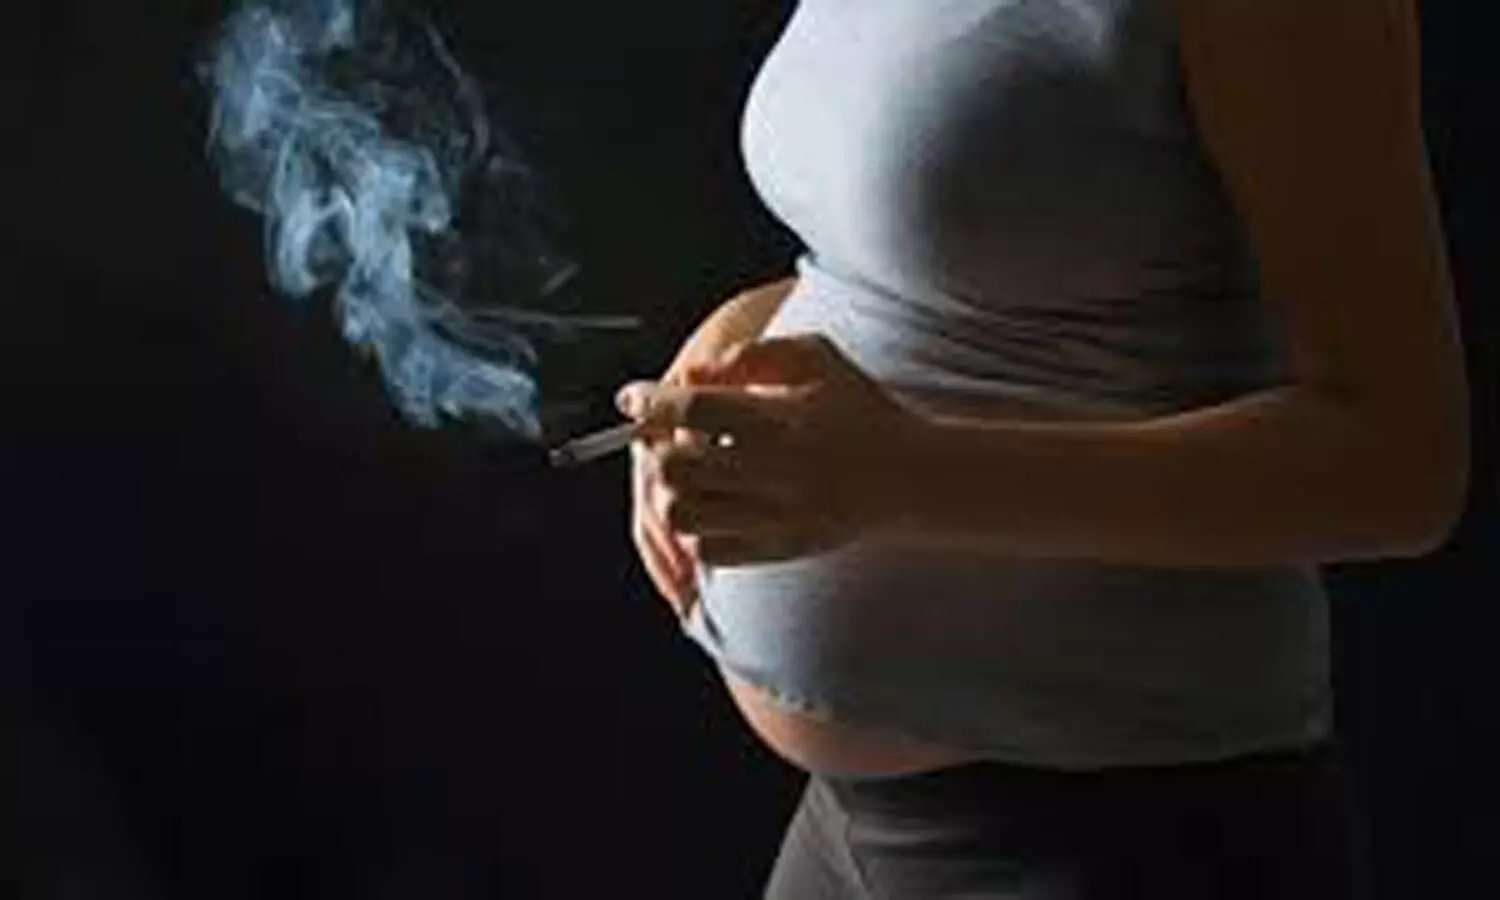 Drinking and smoking after first trimester of pregnancy raises risk of stillbirth: JAMA